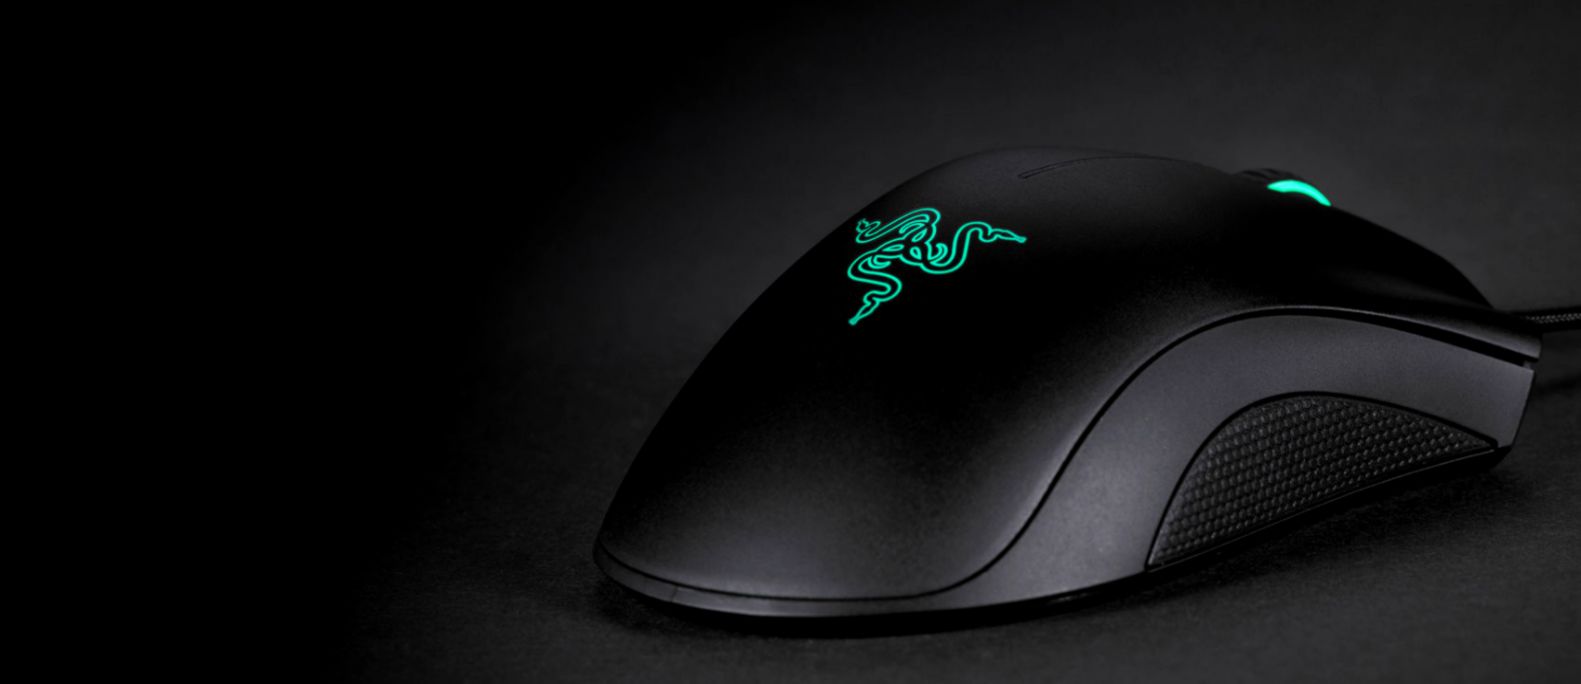 Reviews Razer Deathadder Chroma And Other Gaming Mice - Mouse - HD Wallpaper 